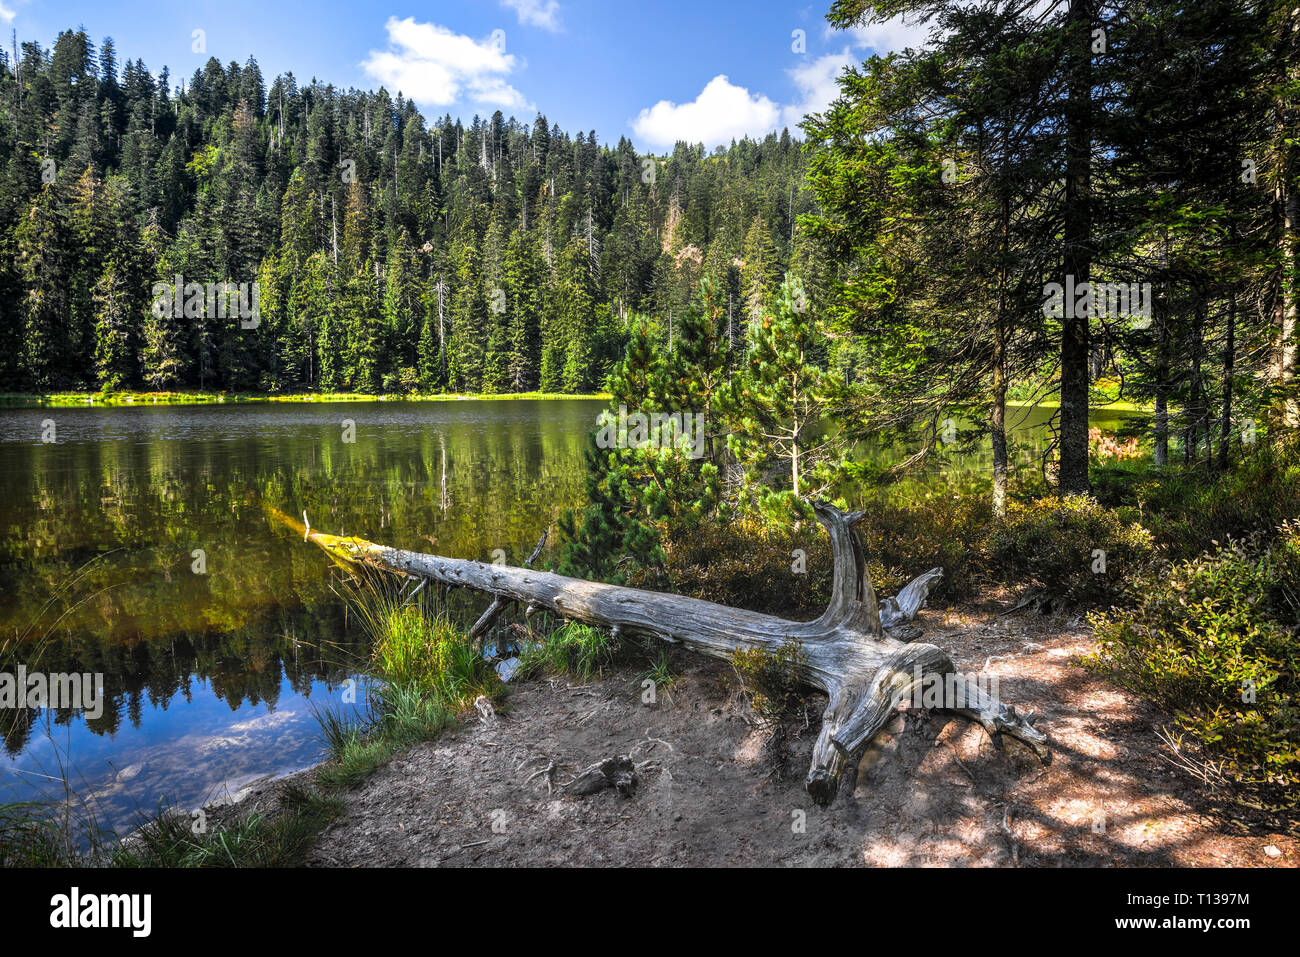 cirque Wildsee Baiersbronn, nature park of the Northern Black Forest, Germany, nature reserve near district Ruhestein Stock Photo Alamy